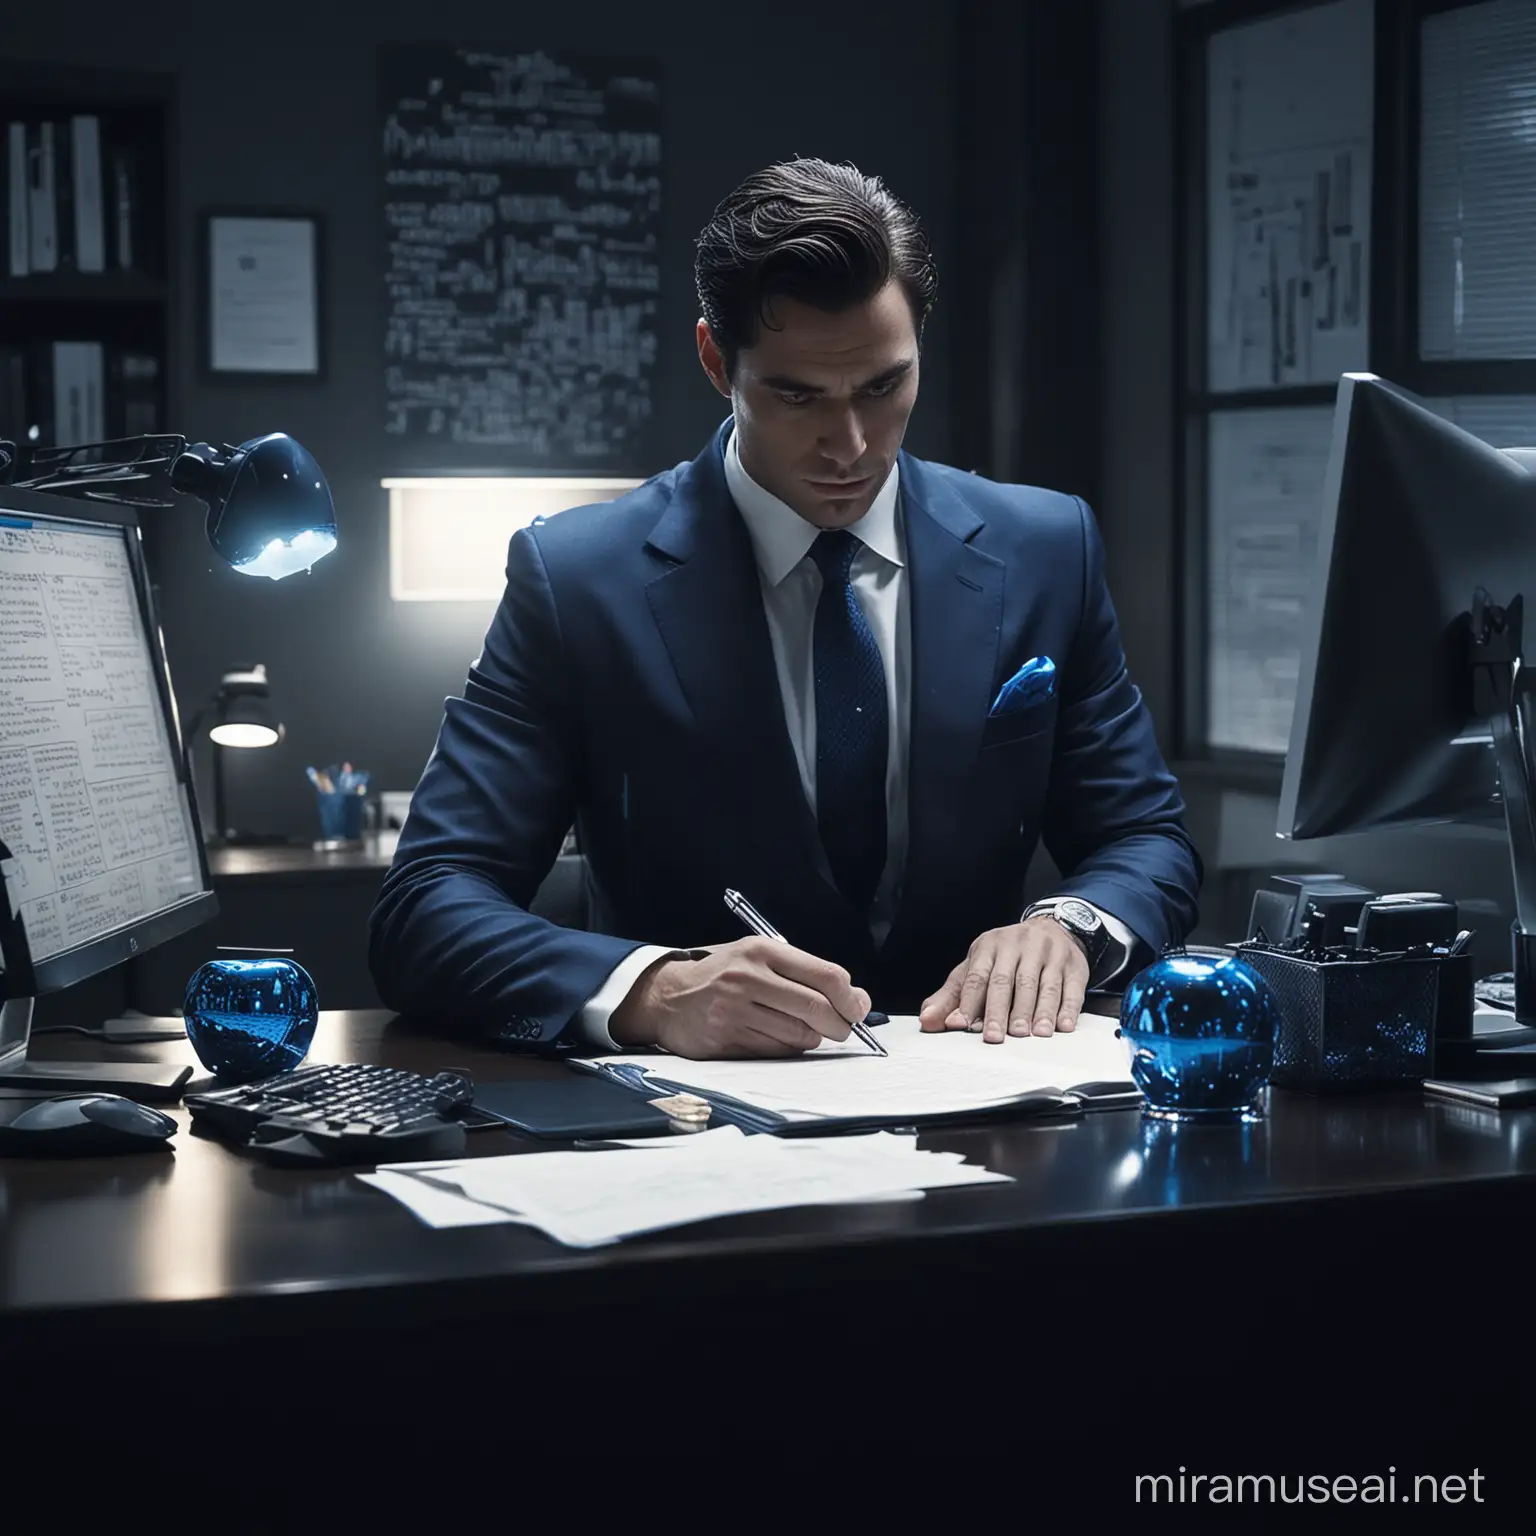 A bulked shredded man dressed in a suit, sitting in his very dark office of luxury, the office only has blue shiny luxurious objects emitting a little amount of blue and silverish light, he holds a handwritten paper on his hand which he looks at with seriousness,  there is an apple computer on his desk, the background is of midnight with only moonlight shining over the scene.